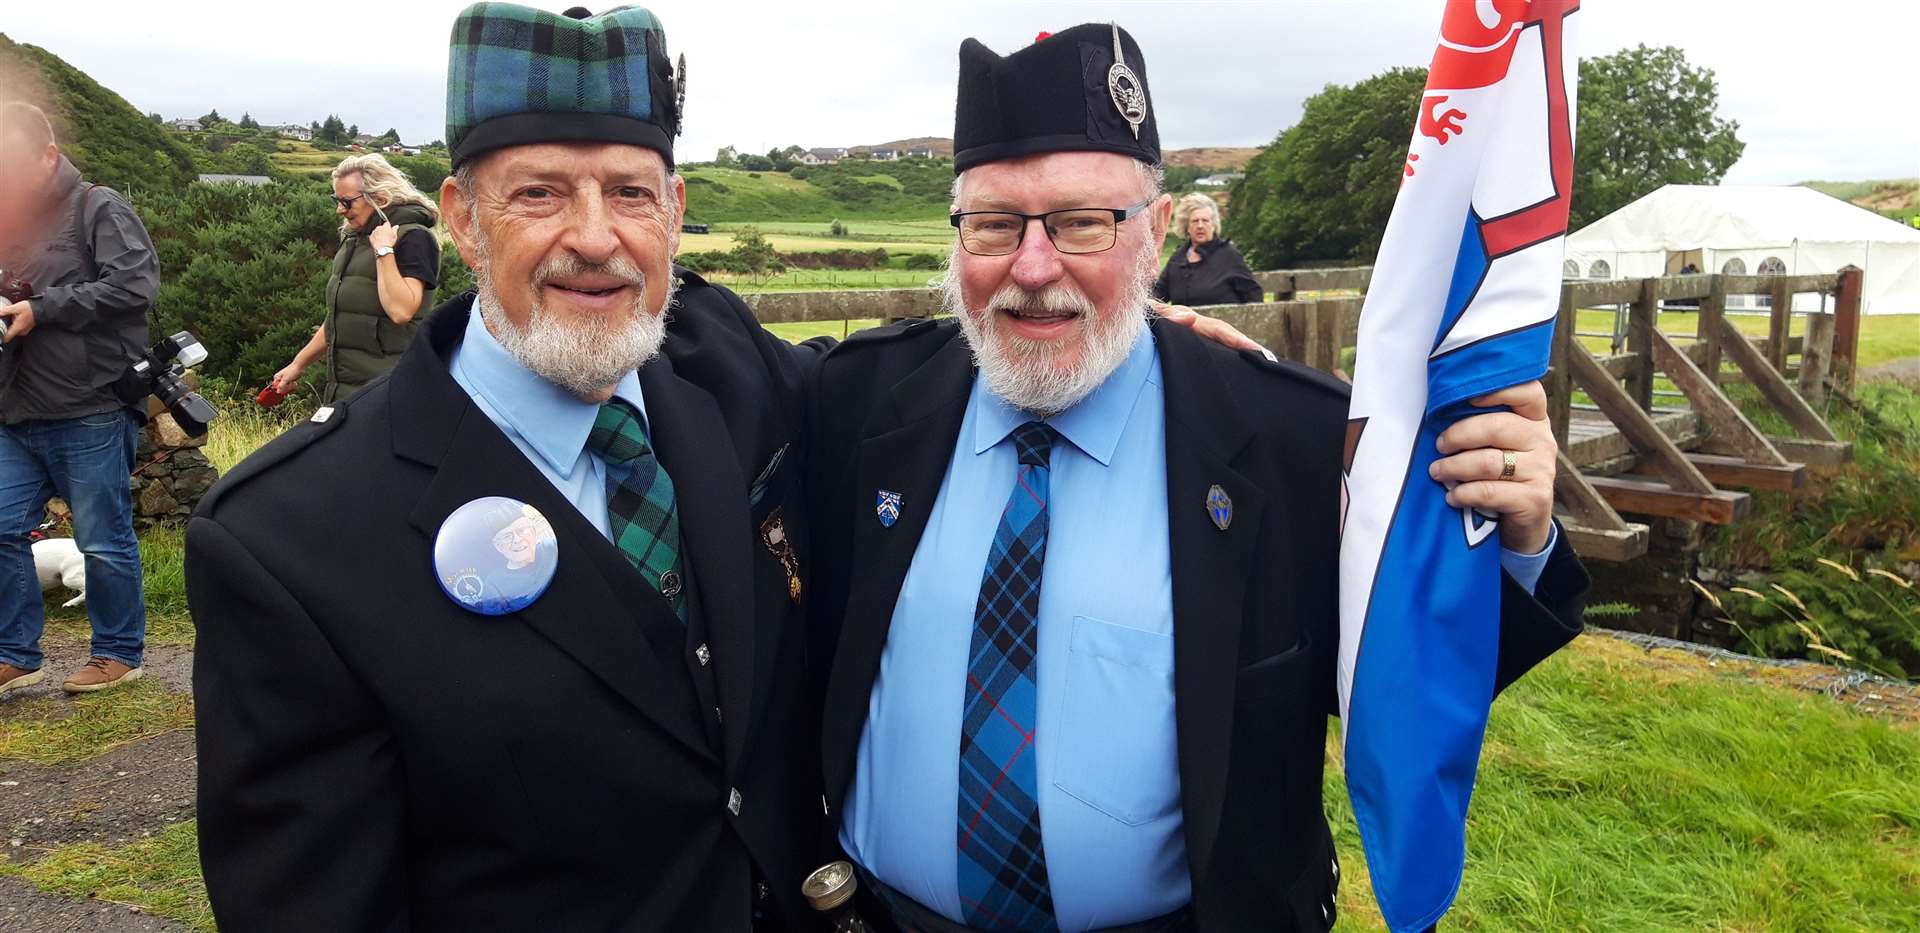 From left, Bob Drew, from Ohio, and Kenneth Mackay, who administered the oath. Mr Drew's great grandfather was Donald Mackay. He said that he had wanted to visit the north of Scotland from the age of 10 when he saw an picture of Castle Varrich in his grandparents' home. "Sixty years later, I have made it!" he said.